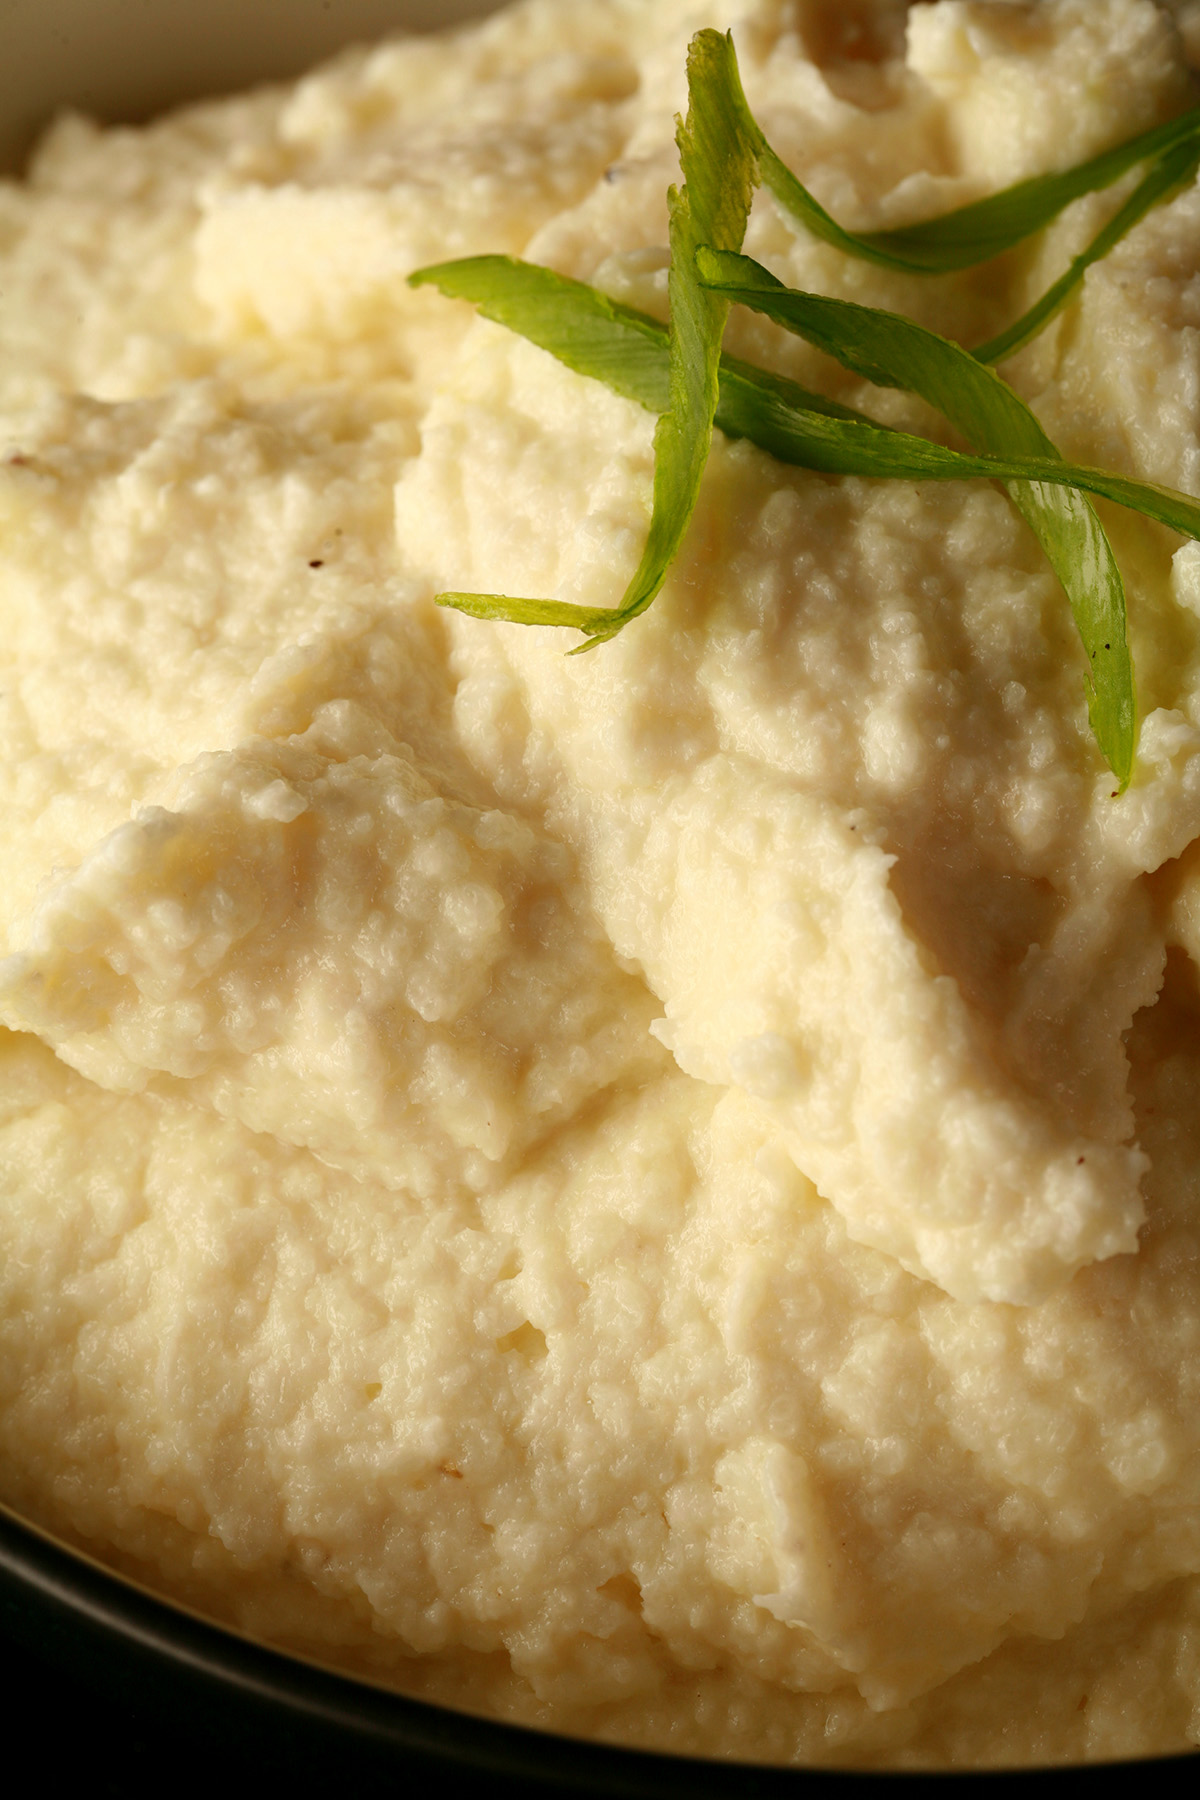 A close up view of a bowl of low carb cauliflower mash, with sliced green onions on top.